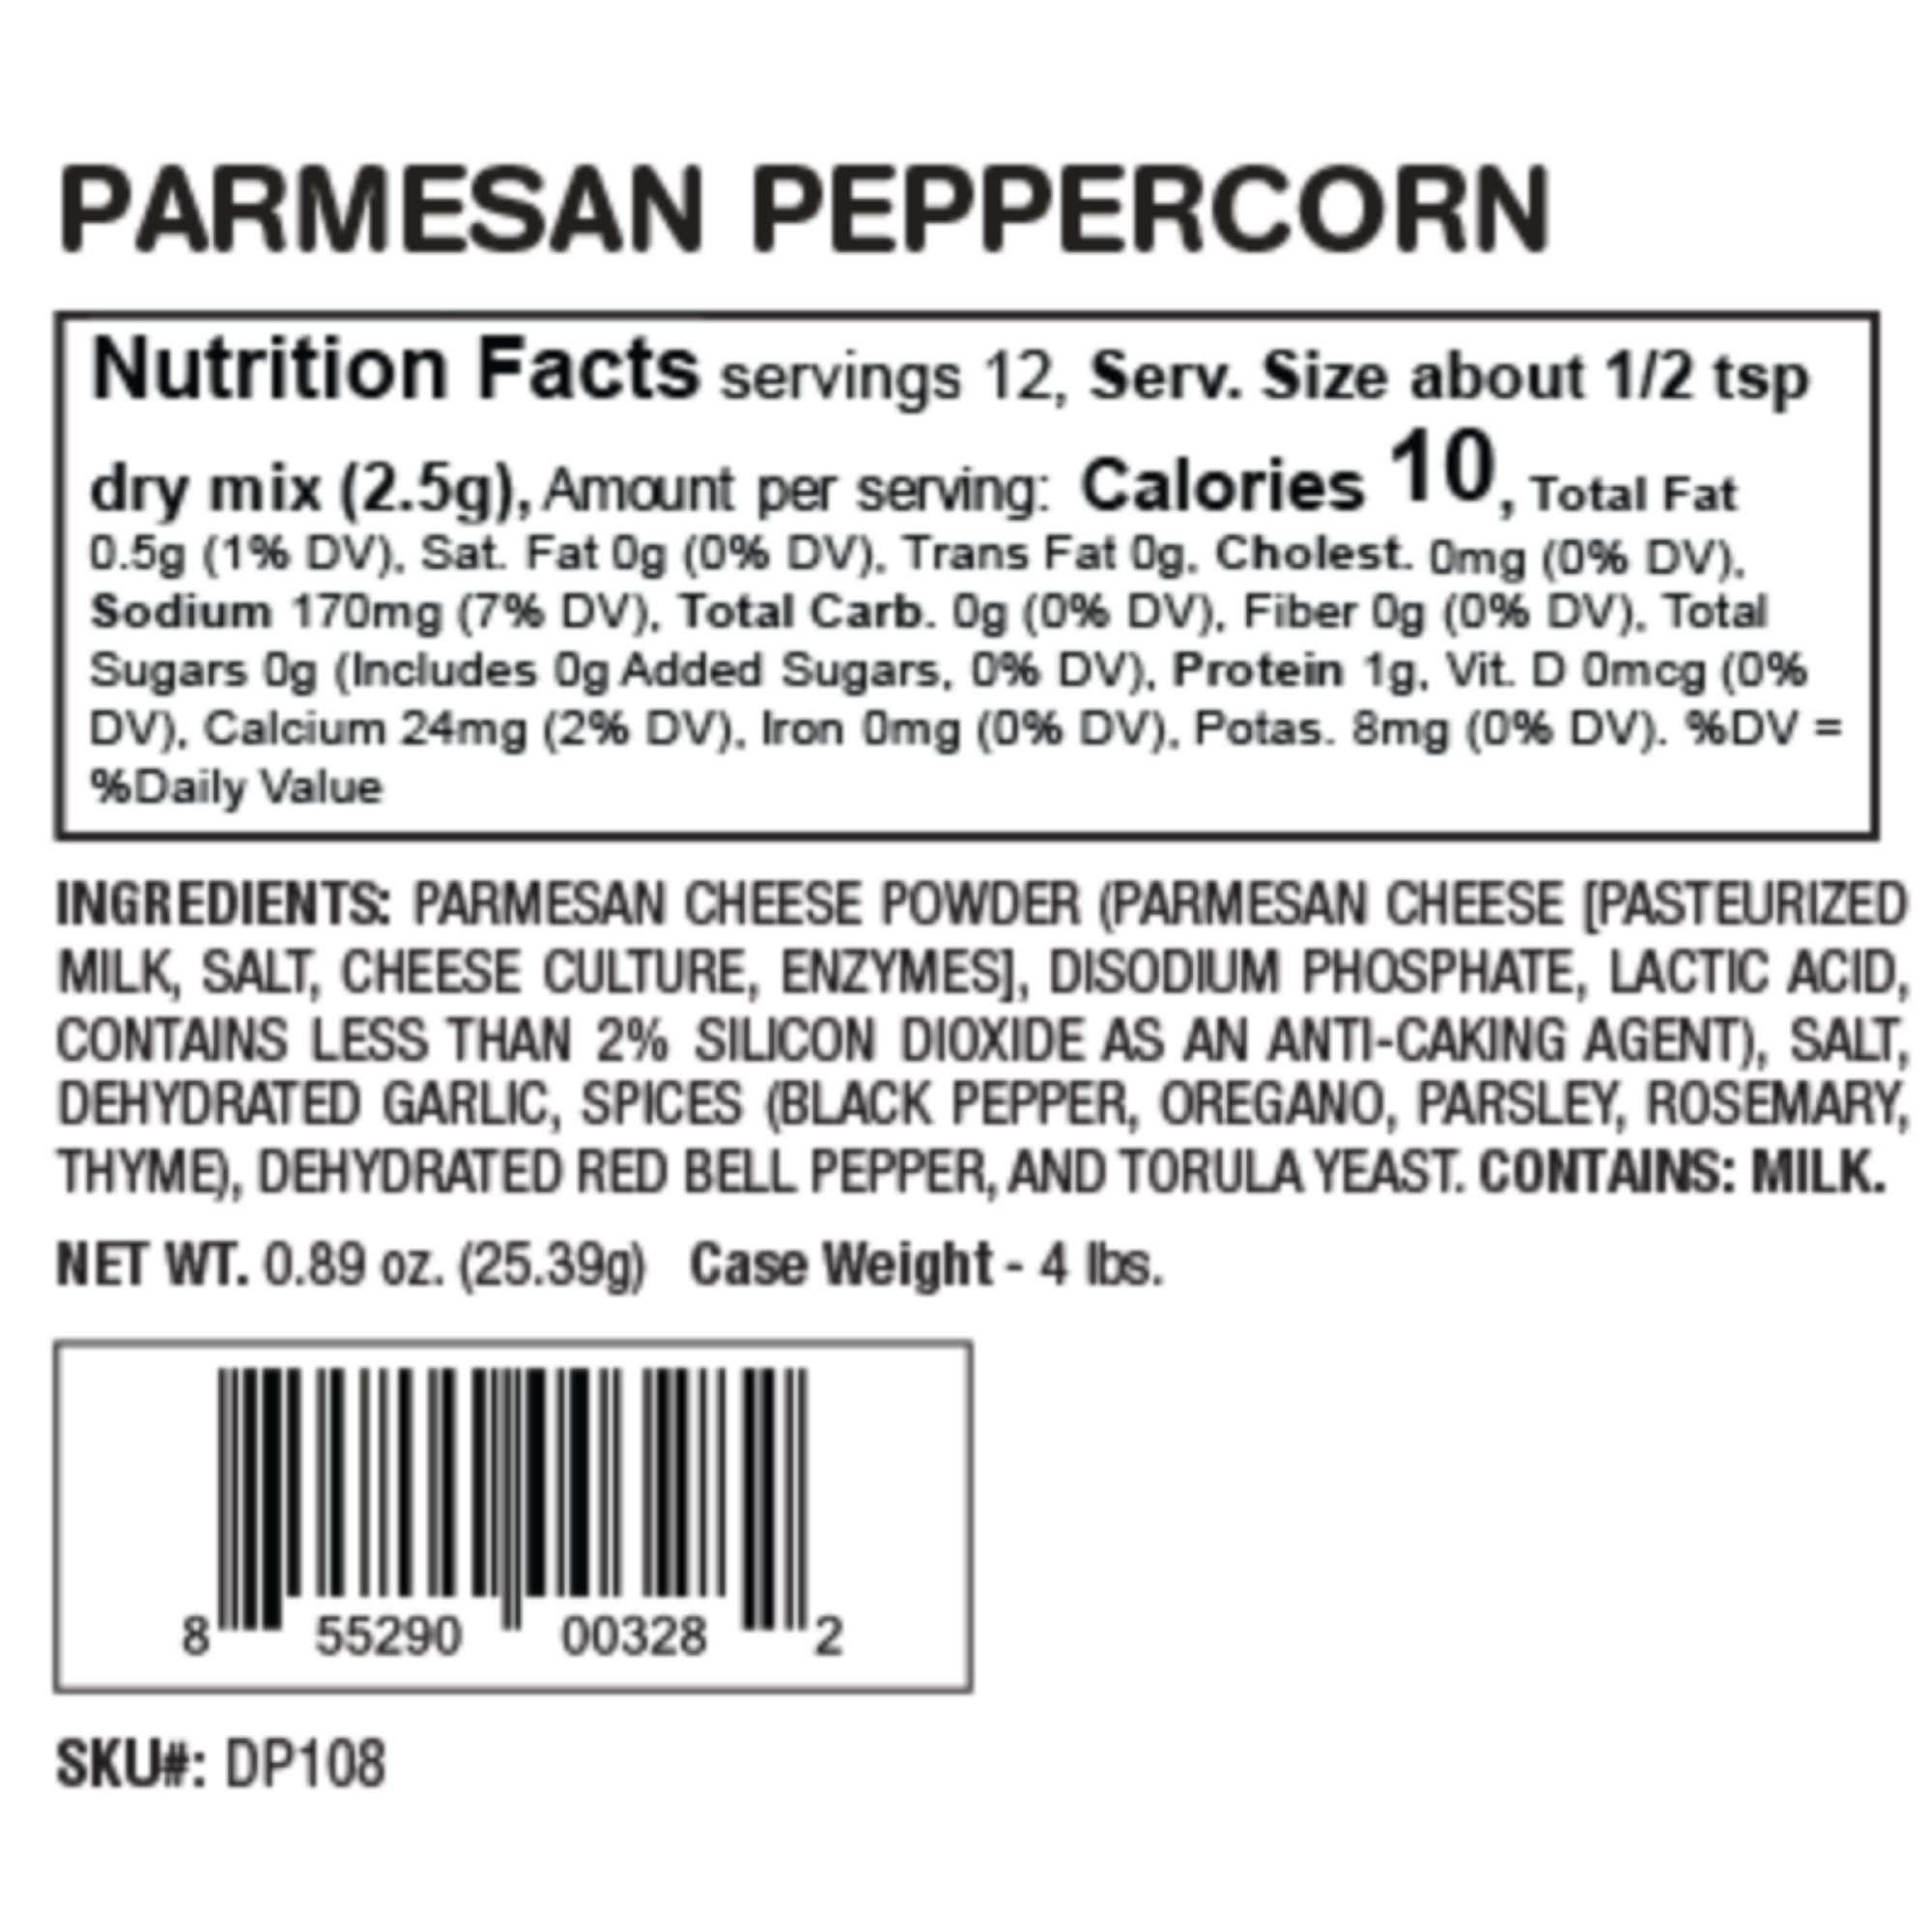 Nutrition Facts of the Parmesan Peppercorn Party Dip Mix